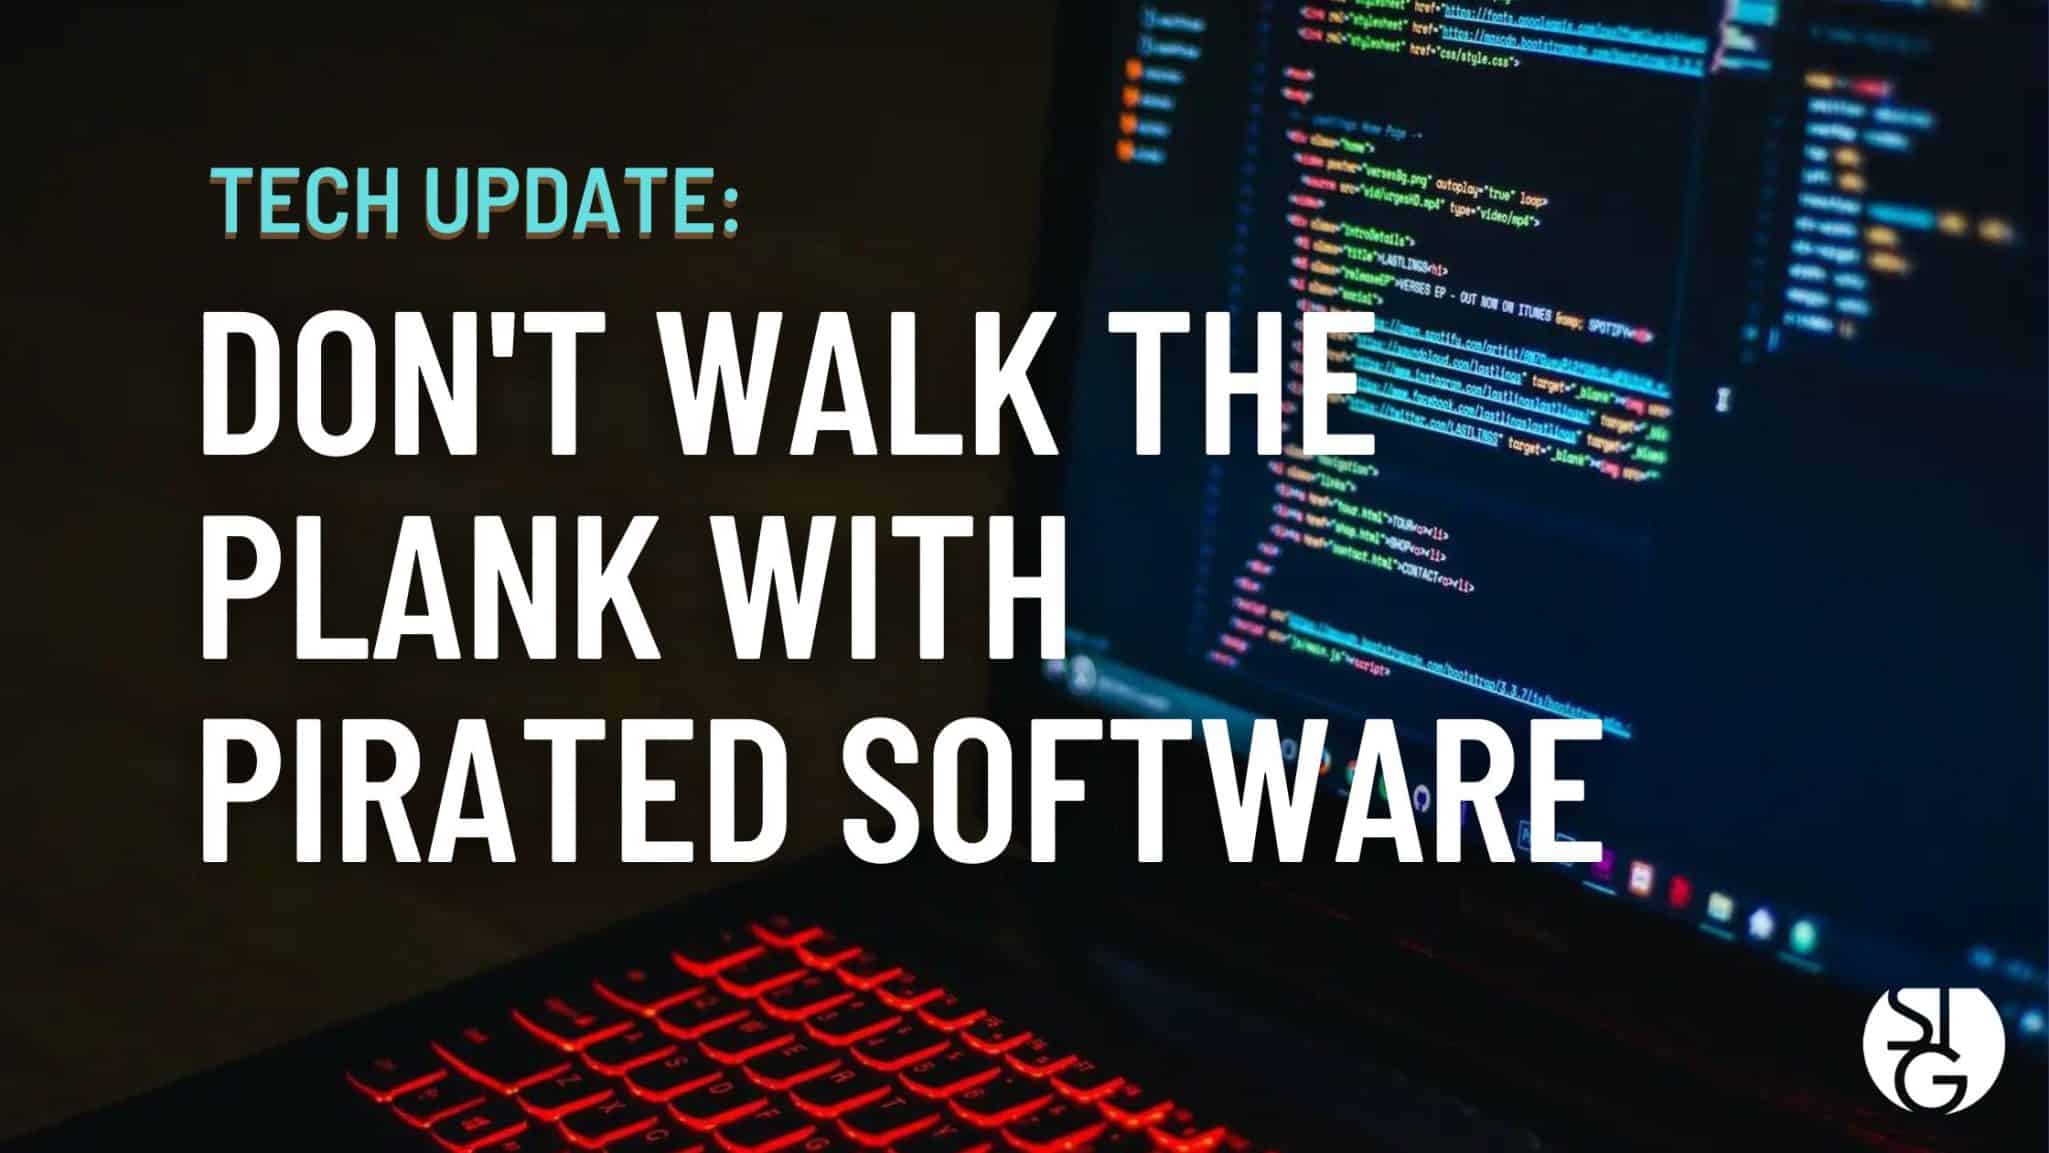 Don't Walk the Plank with Pirated Software